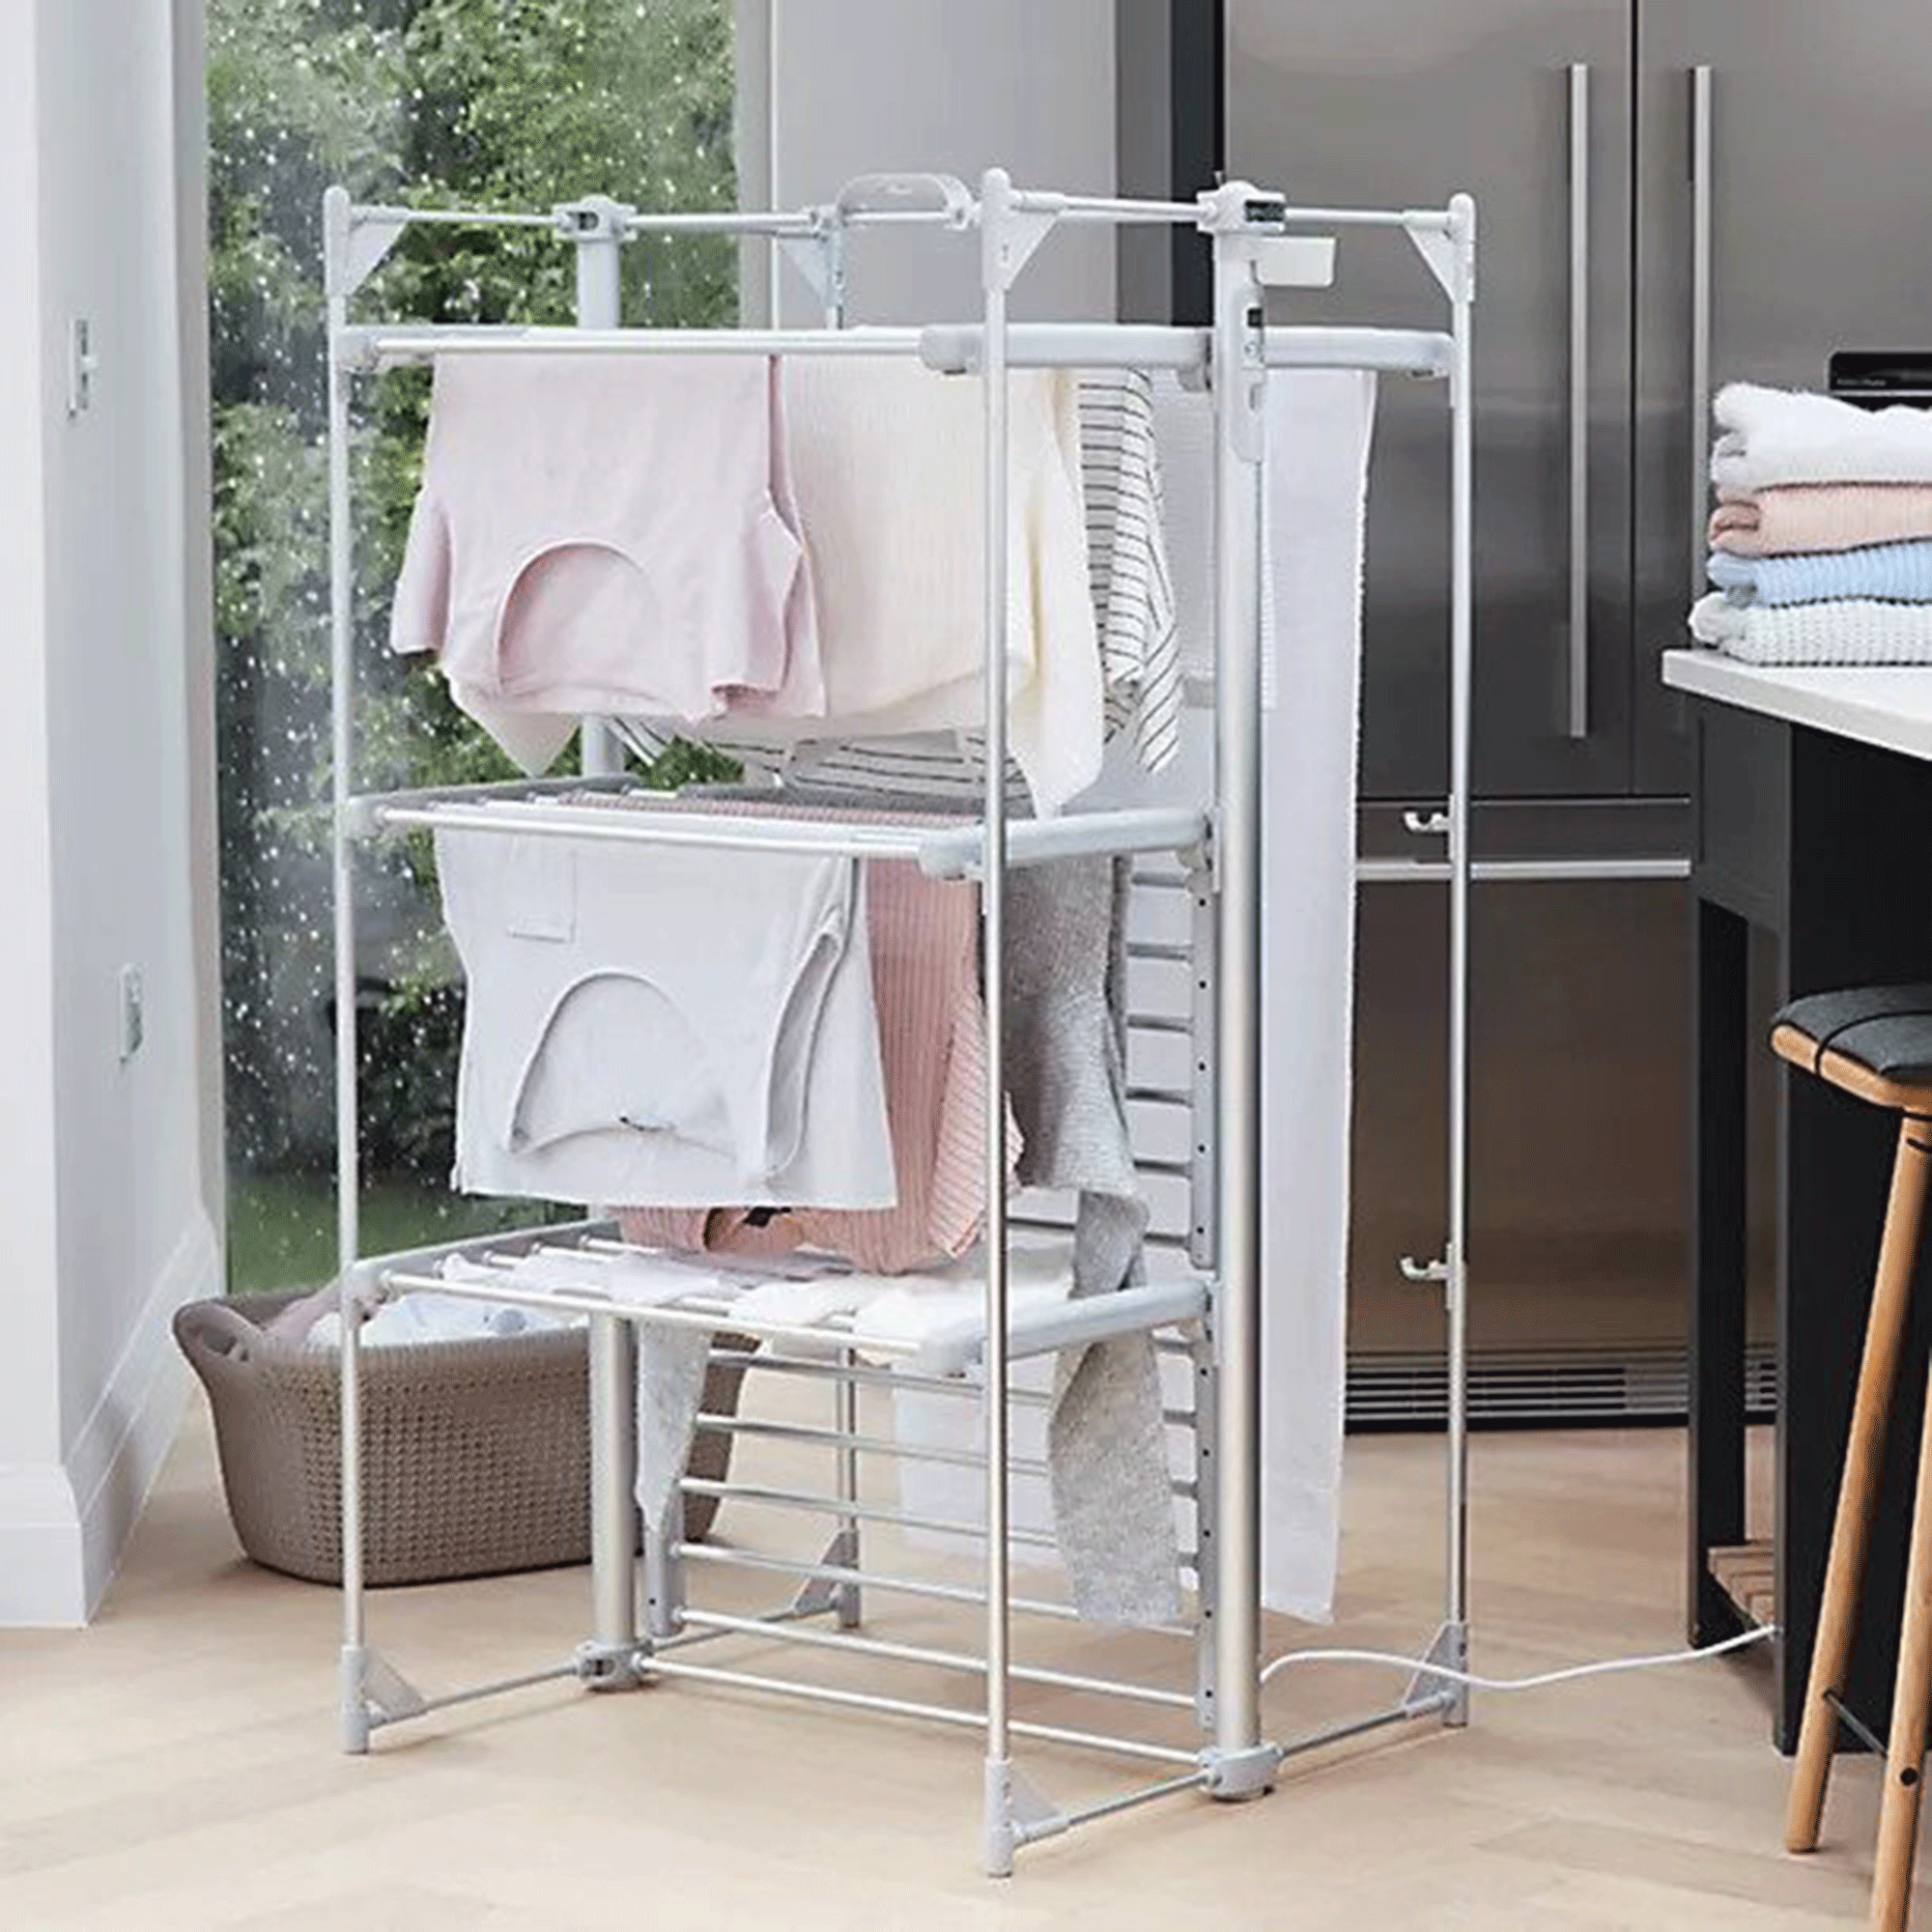 7 heated clothes airer mistakes that could be doubling your drying time and energy bills